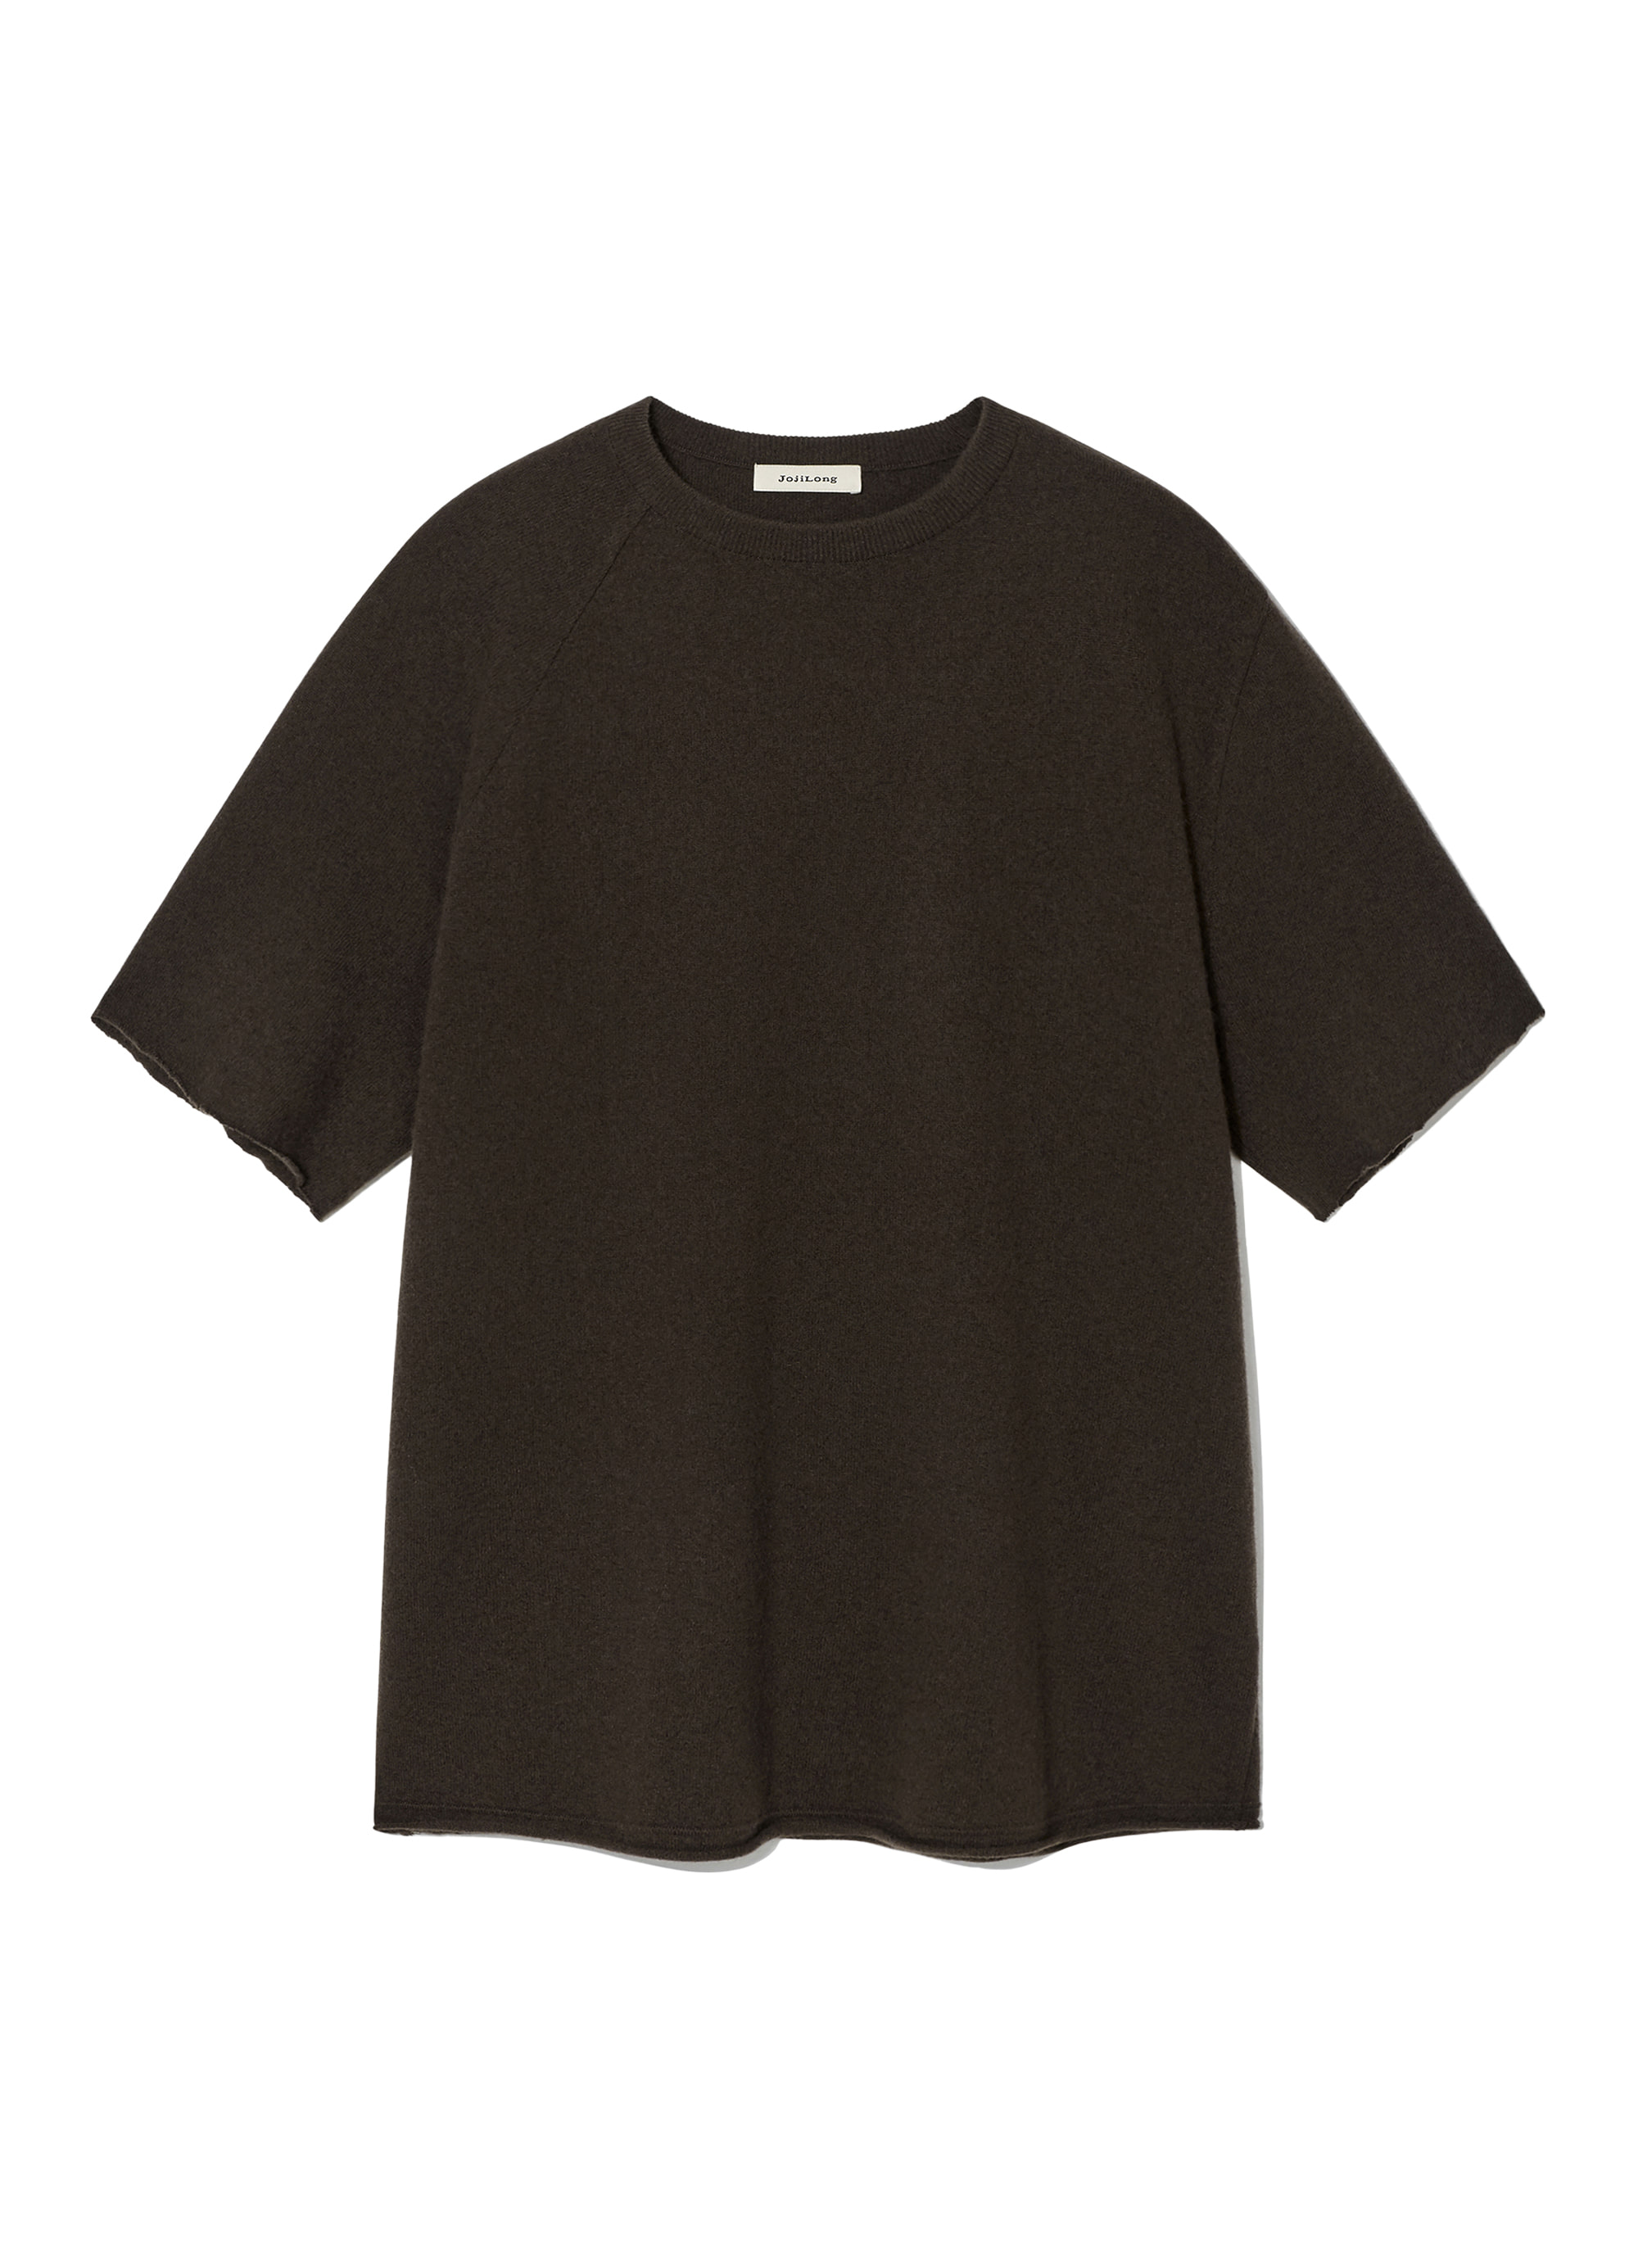 101 CASHMERE DISTRESSED SLEEVE KNIT - BROWN